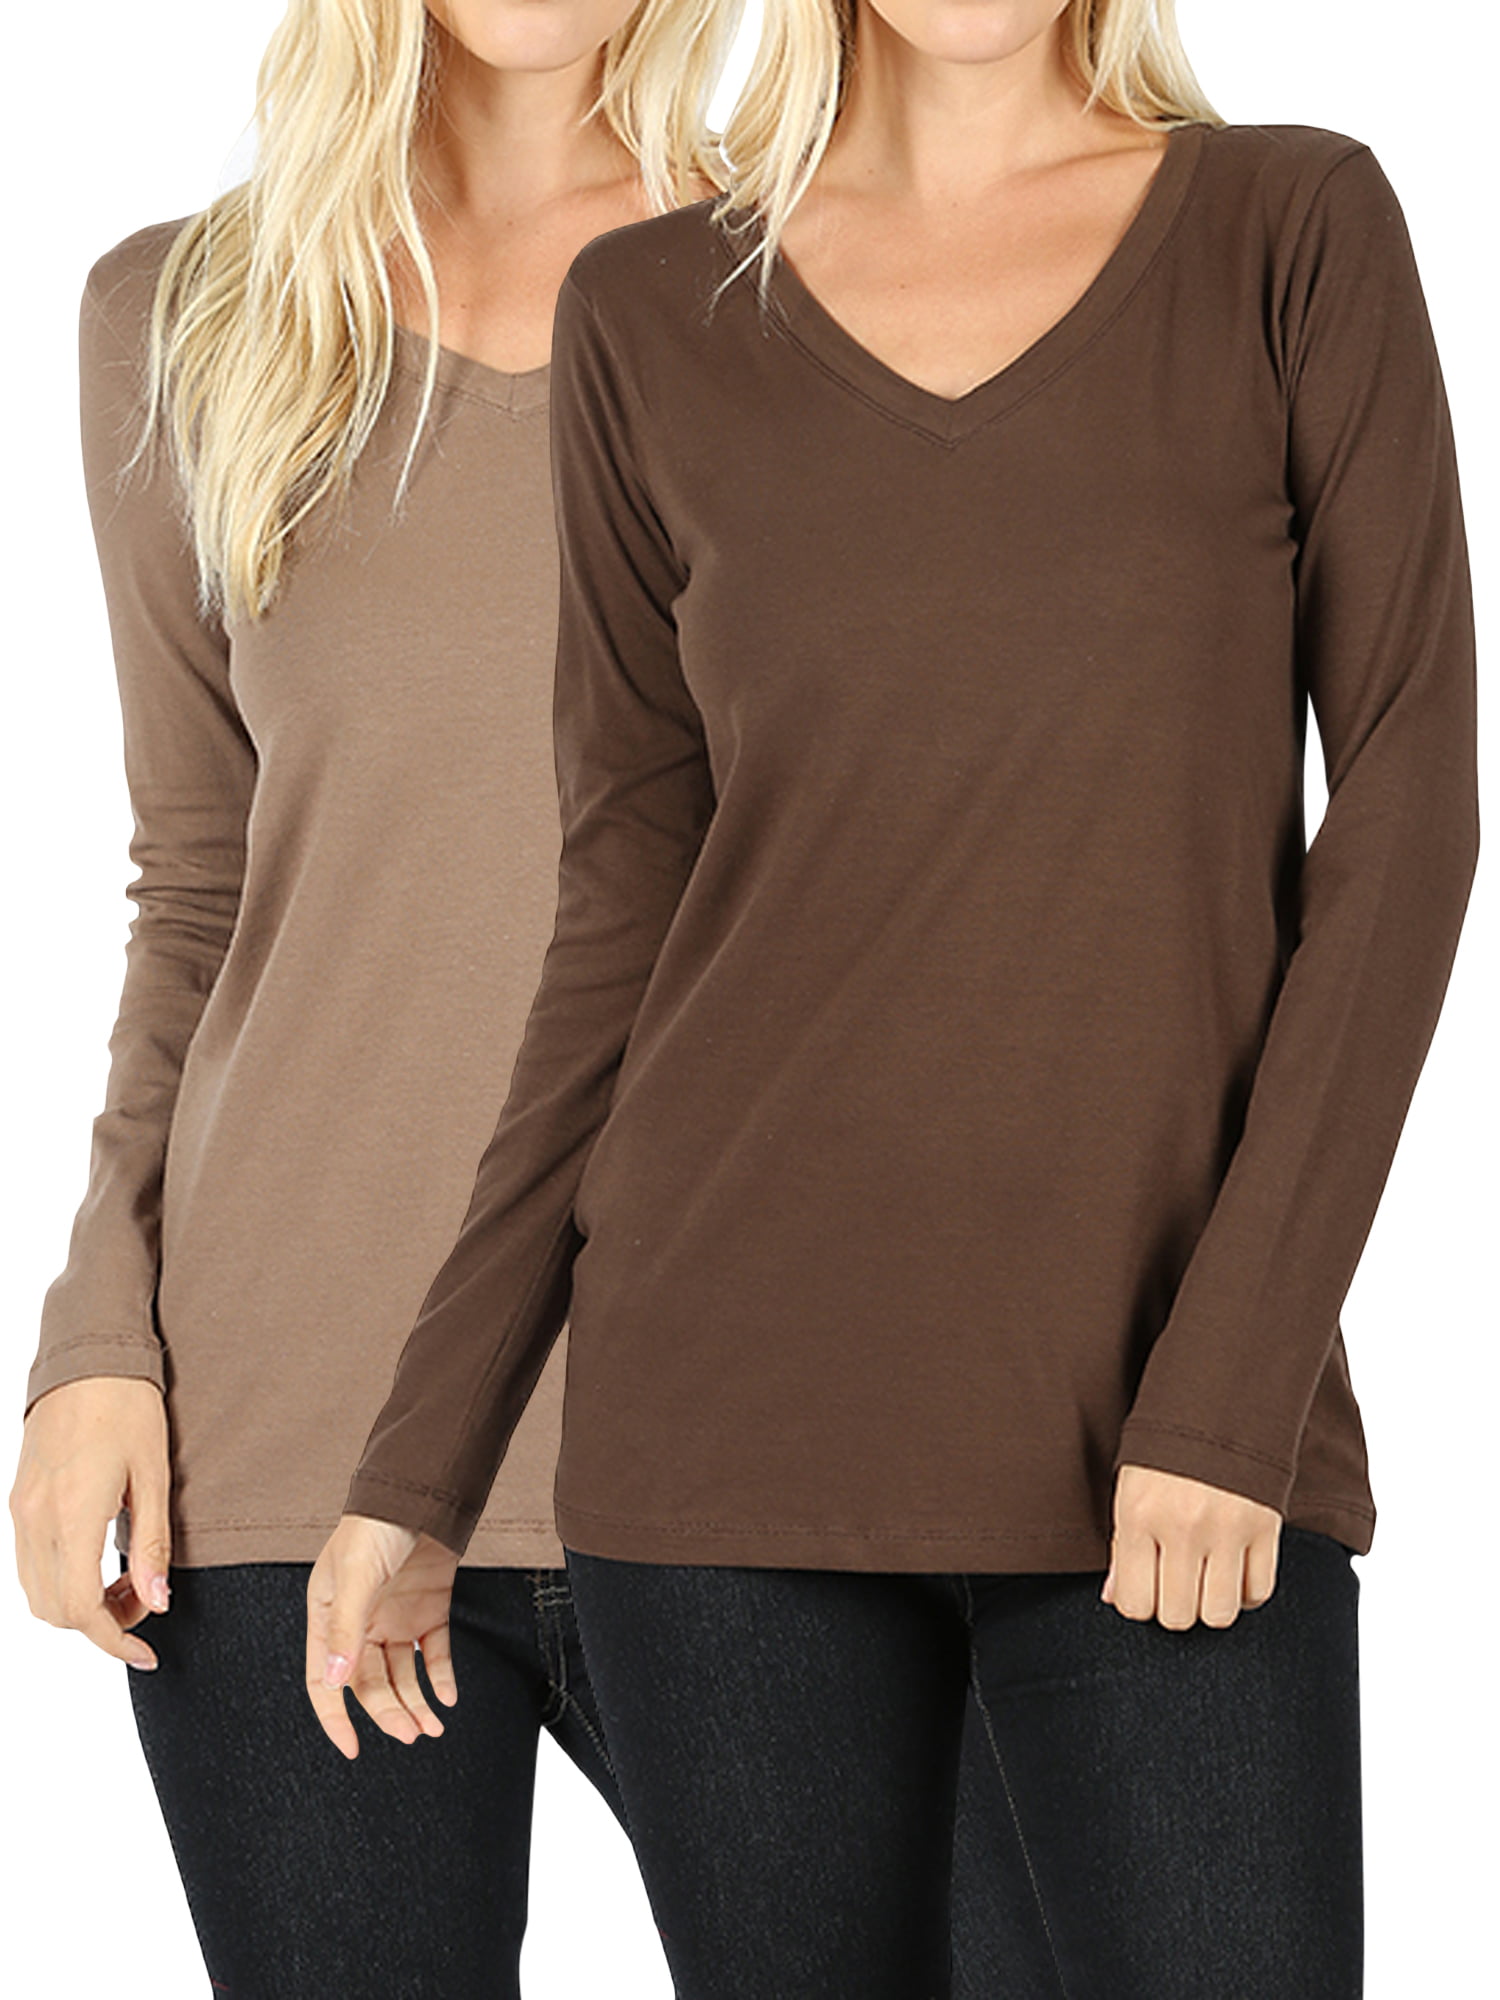 Women Casual Basic Cotton Loose Fit V-Neck Long Sleeve T-Shirt Top